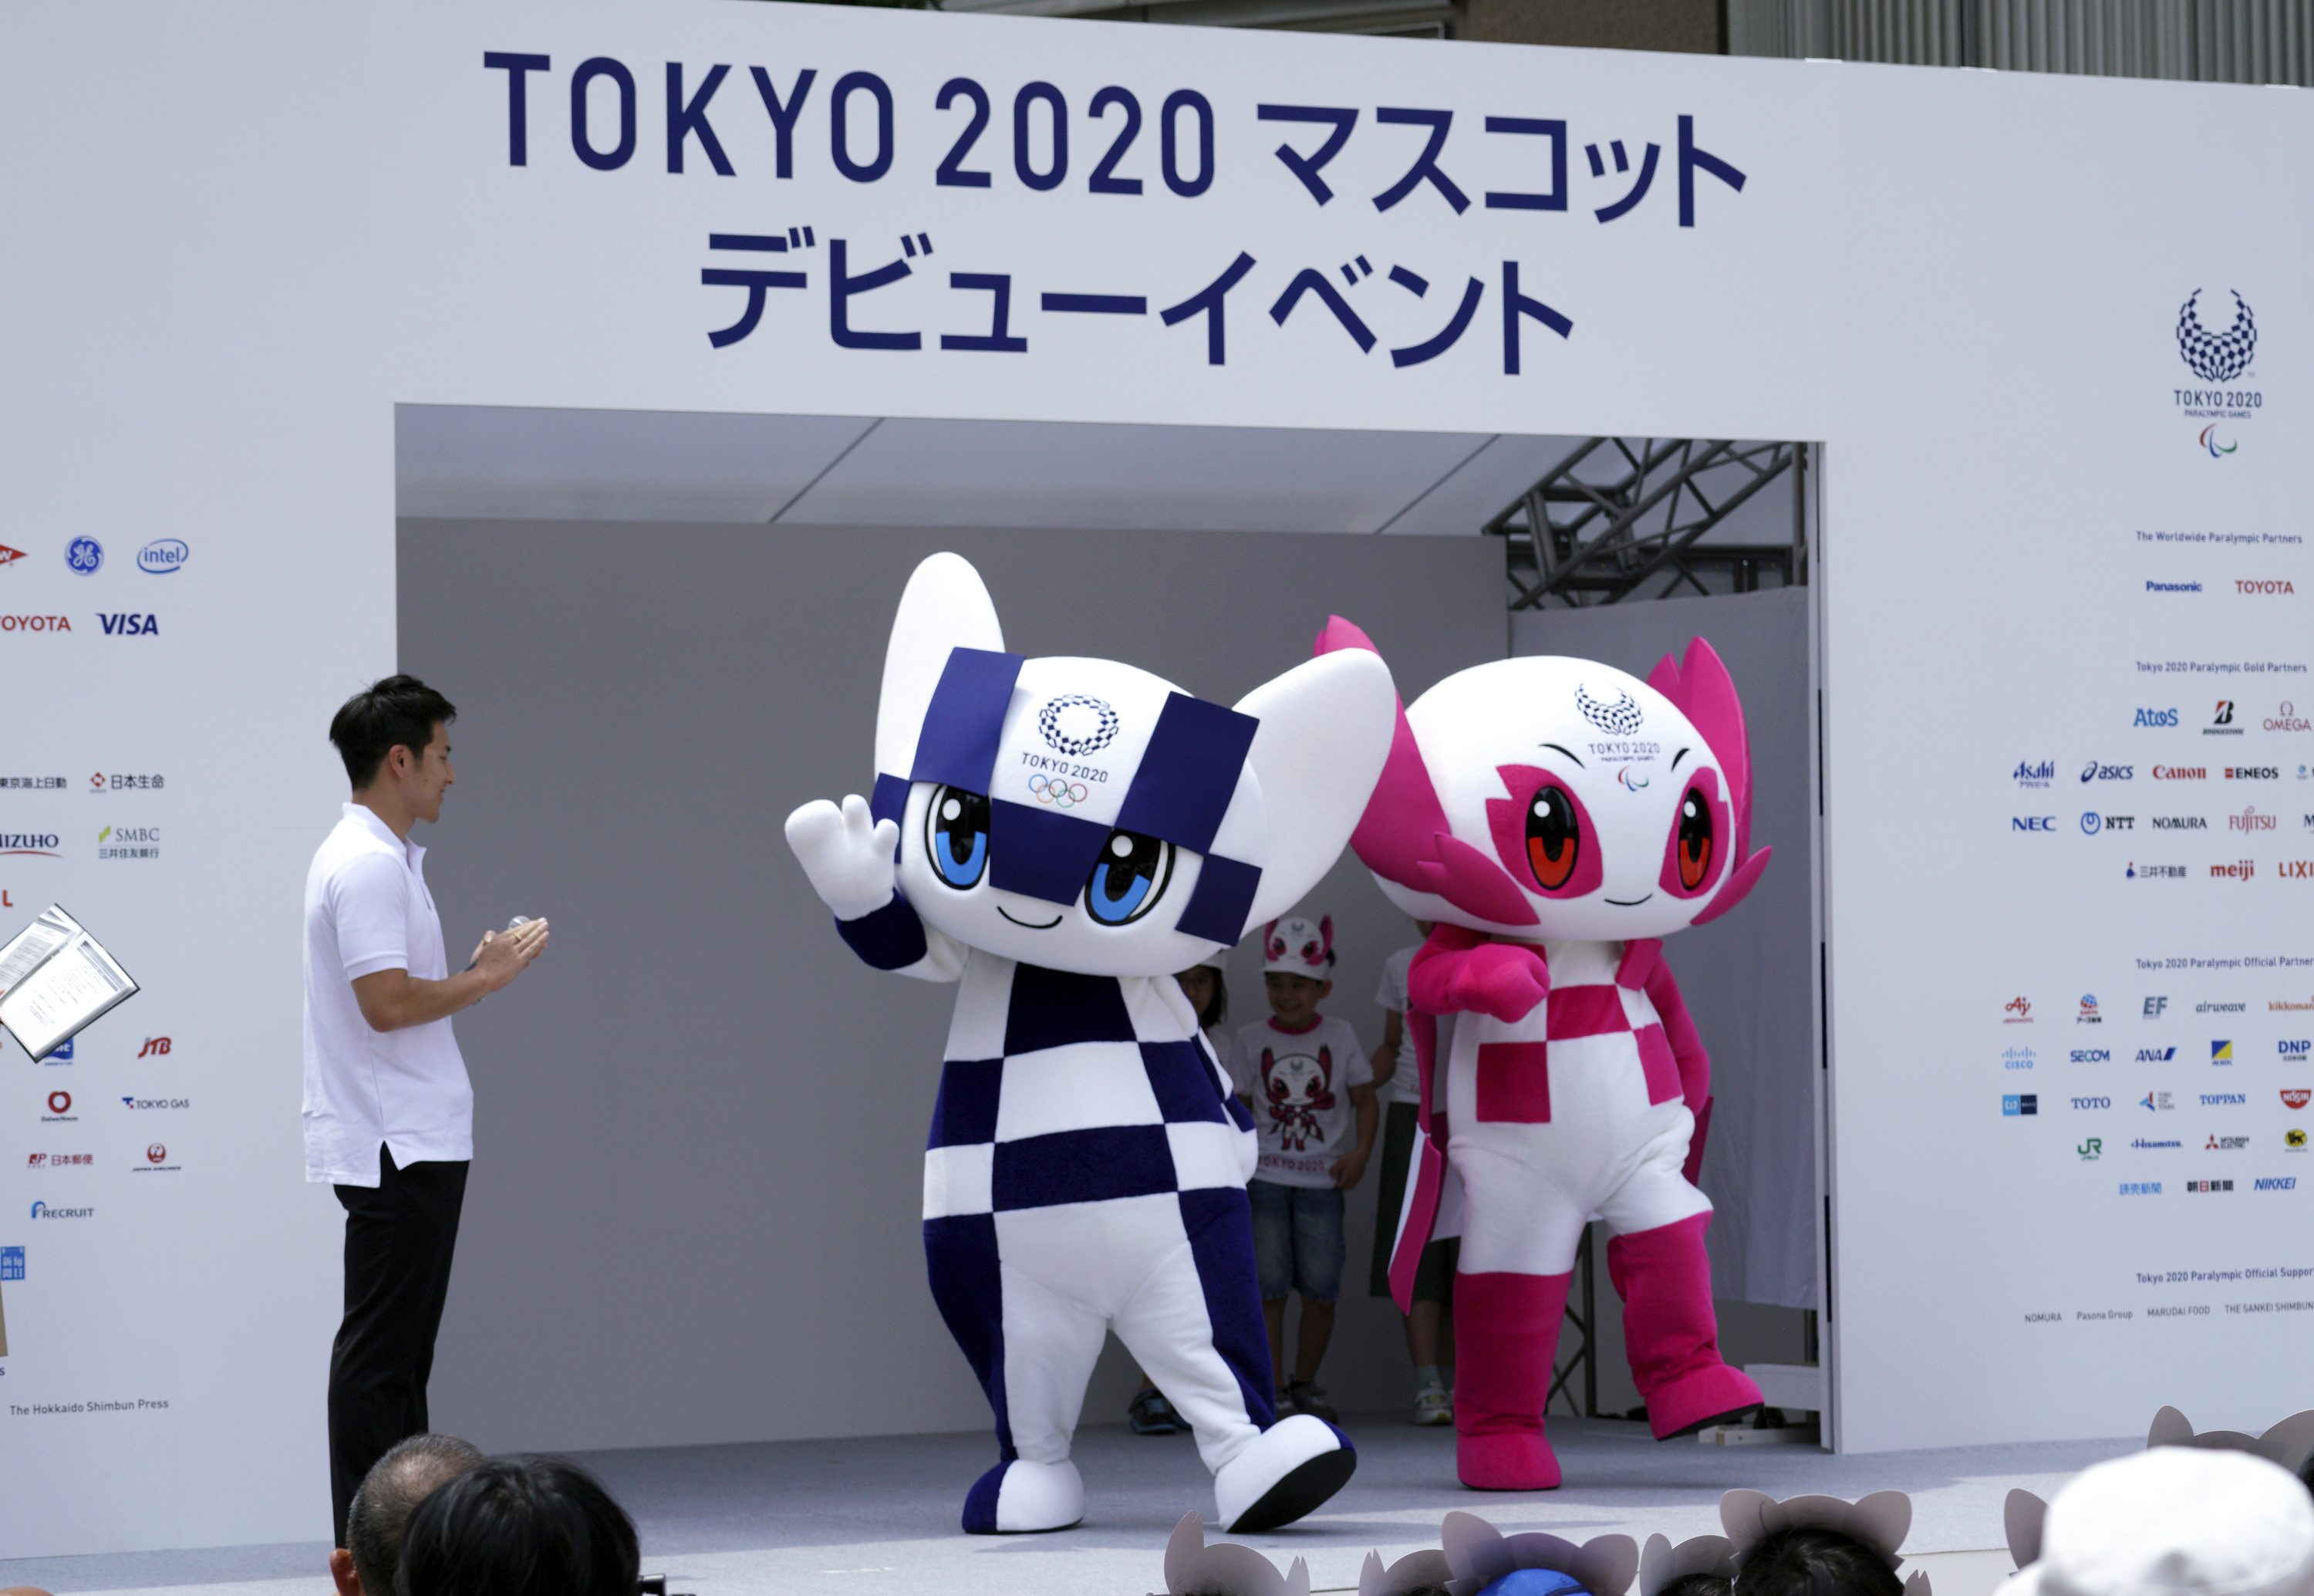 Tokyo 2020 Olympic and Paralympic mascot